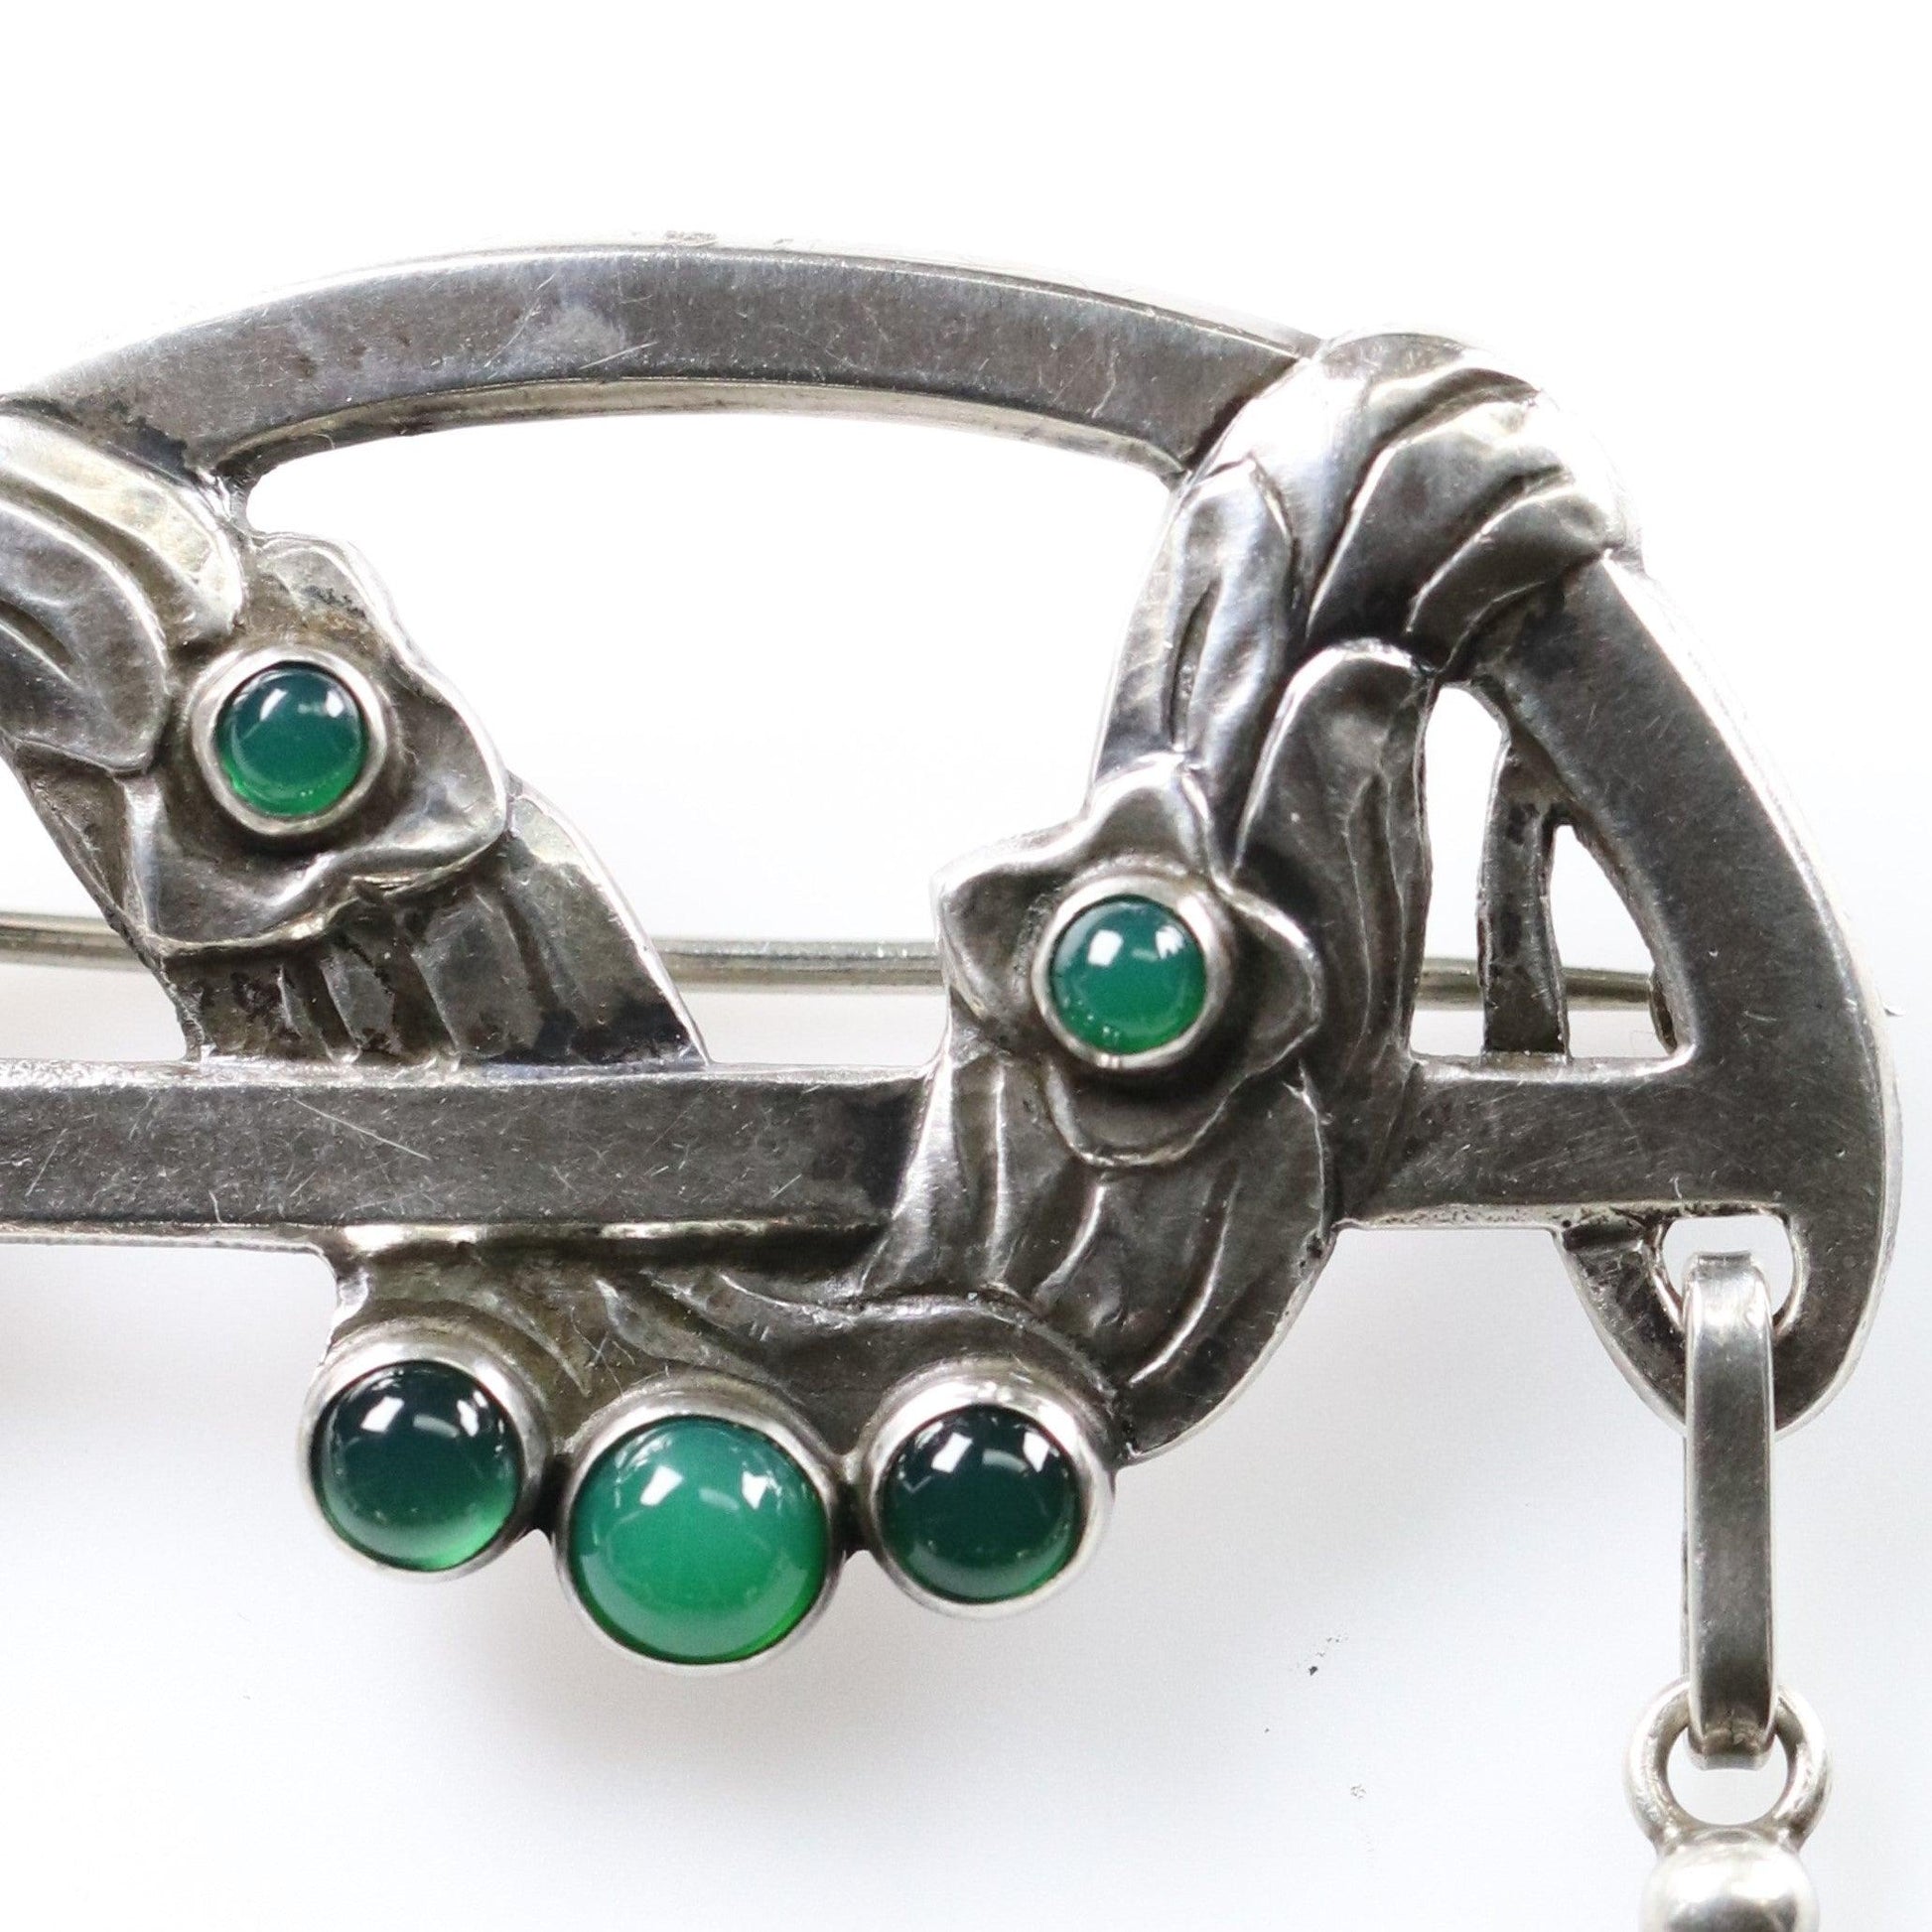 Antique Georg Jensen Jewelry | Rare Early Chrysoprase and Amber Brooch 8 - Carmel Fine Silver Jewelry